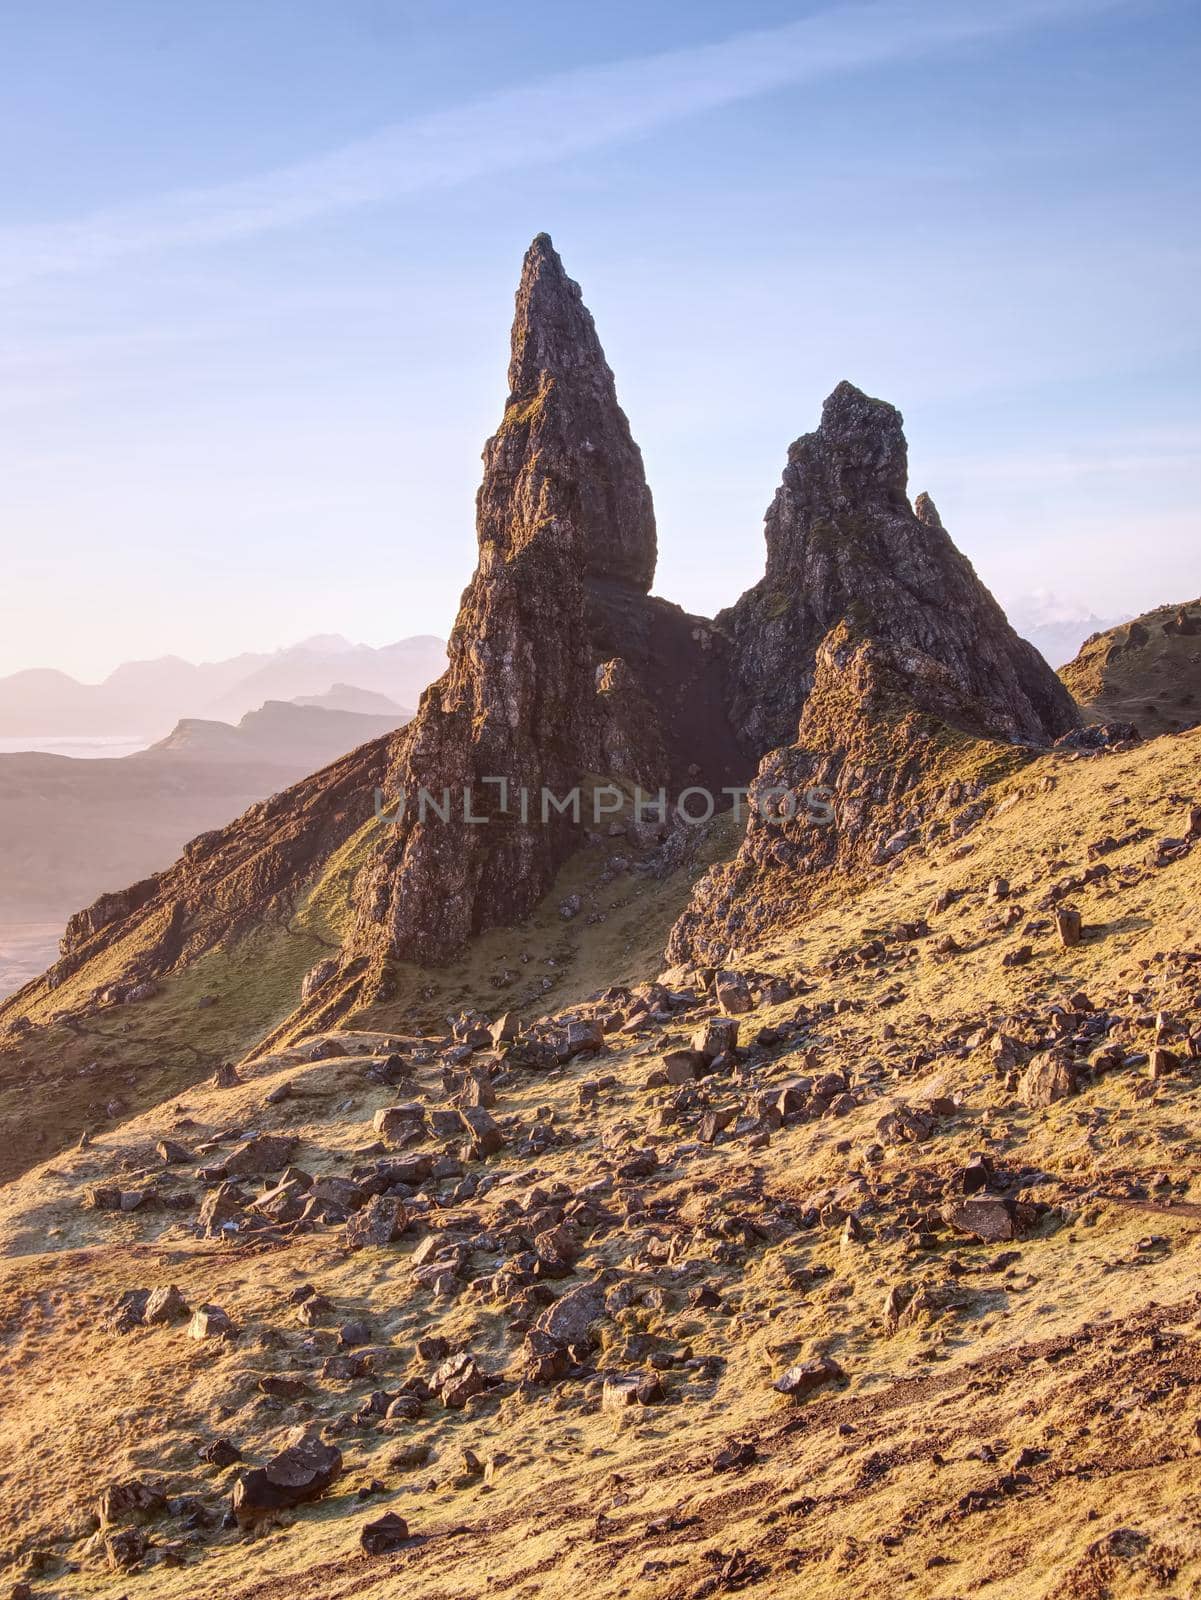 The Old Man of Storr is one of the most photographed wonders in the world. The Isle of Skye, Highlands in Scotland, United Kingdom. 